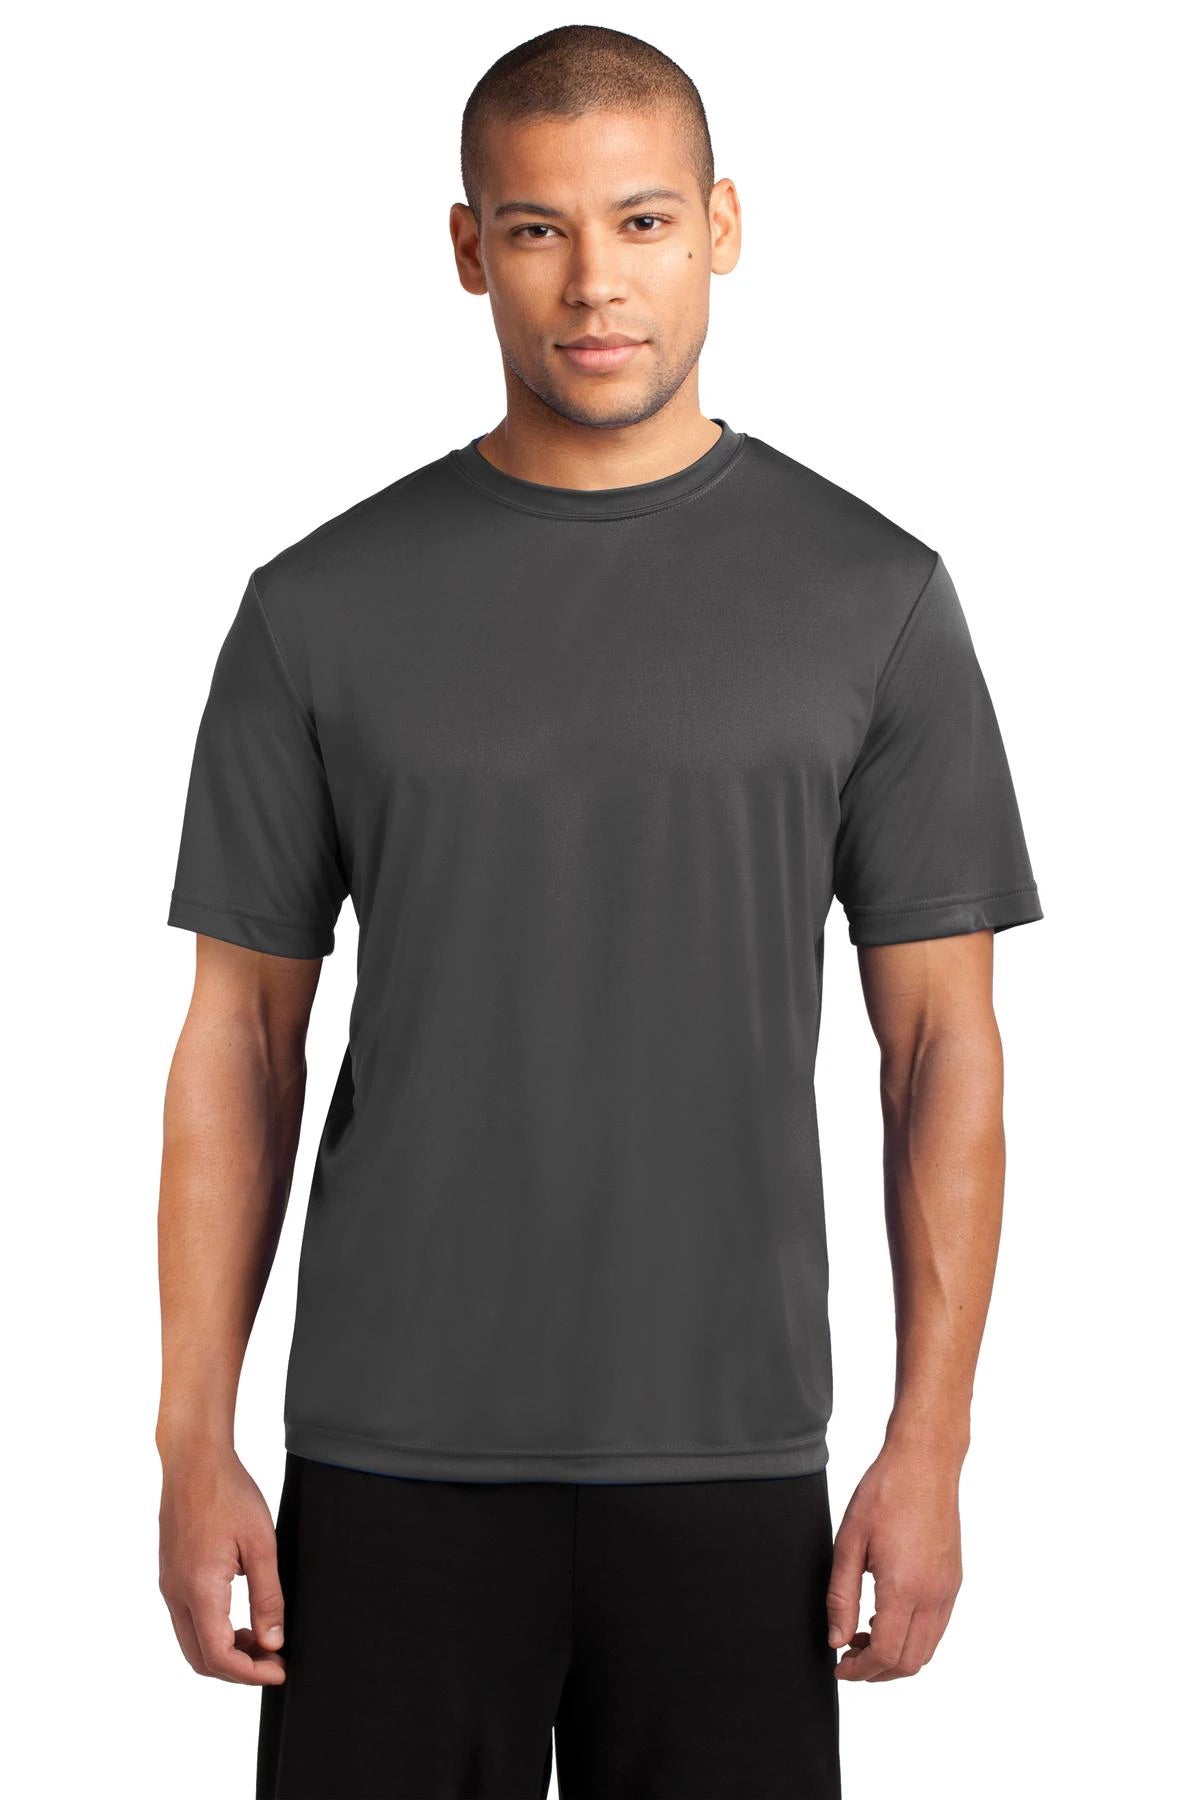 Style Wear 100% Polyester-Dri Fit T-shirts Short Sleeves